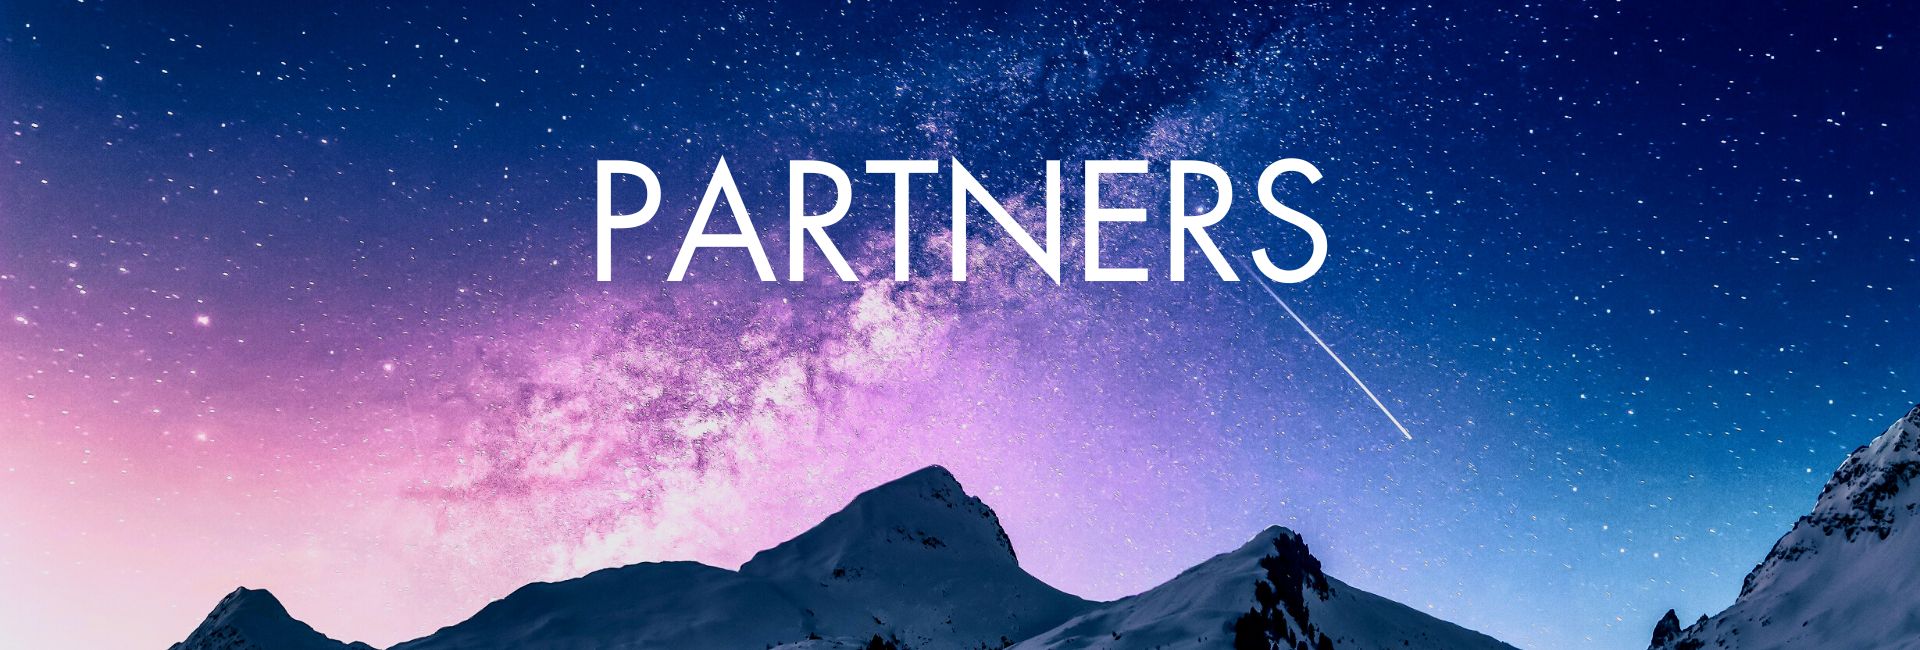 Partners Banner Image